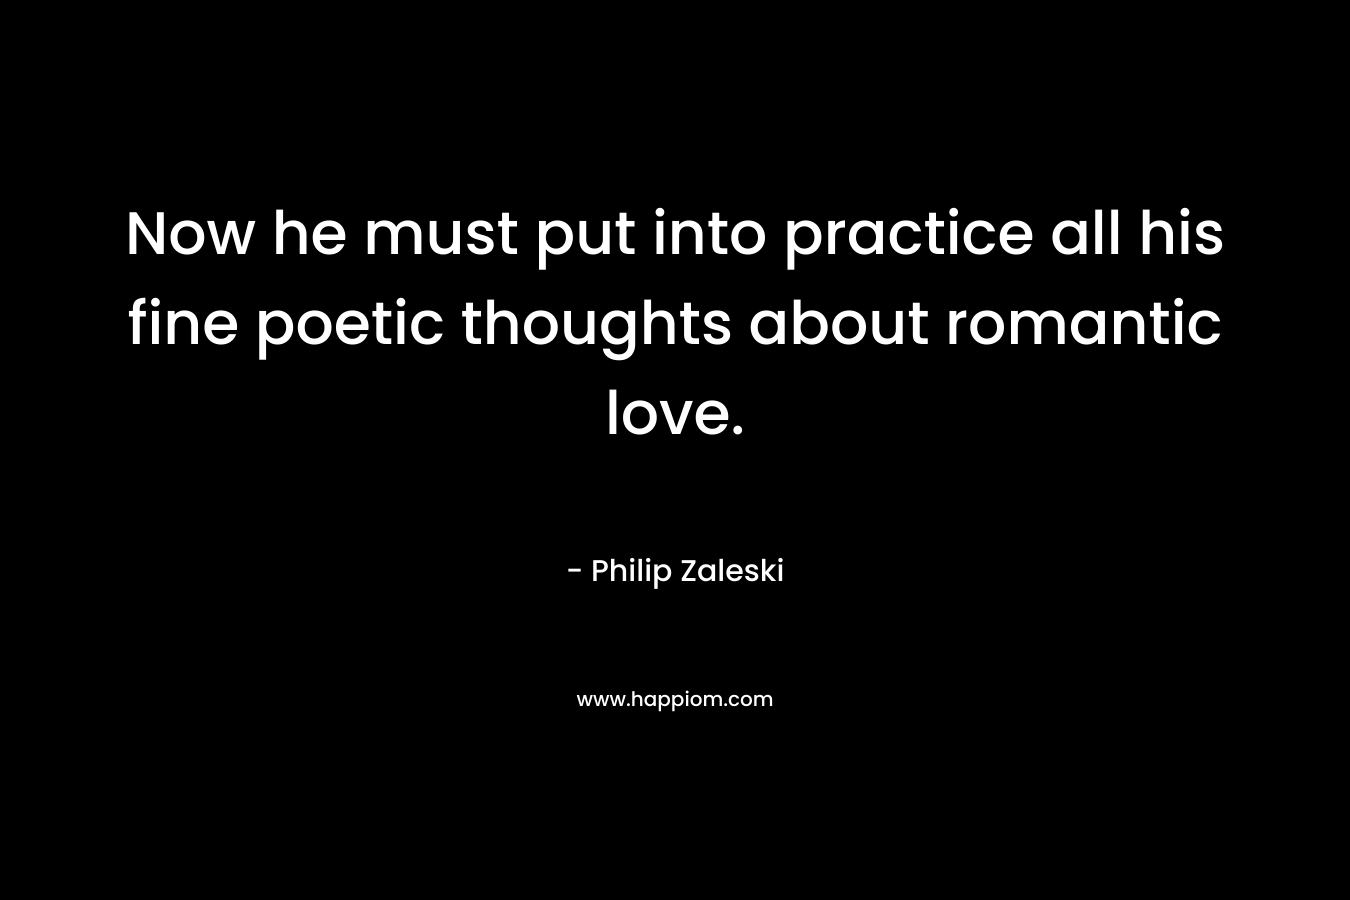 Now he must put into practice all his fine poetic thoughts about romantic love.